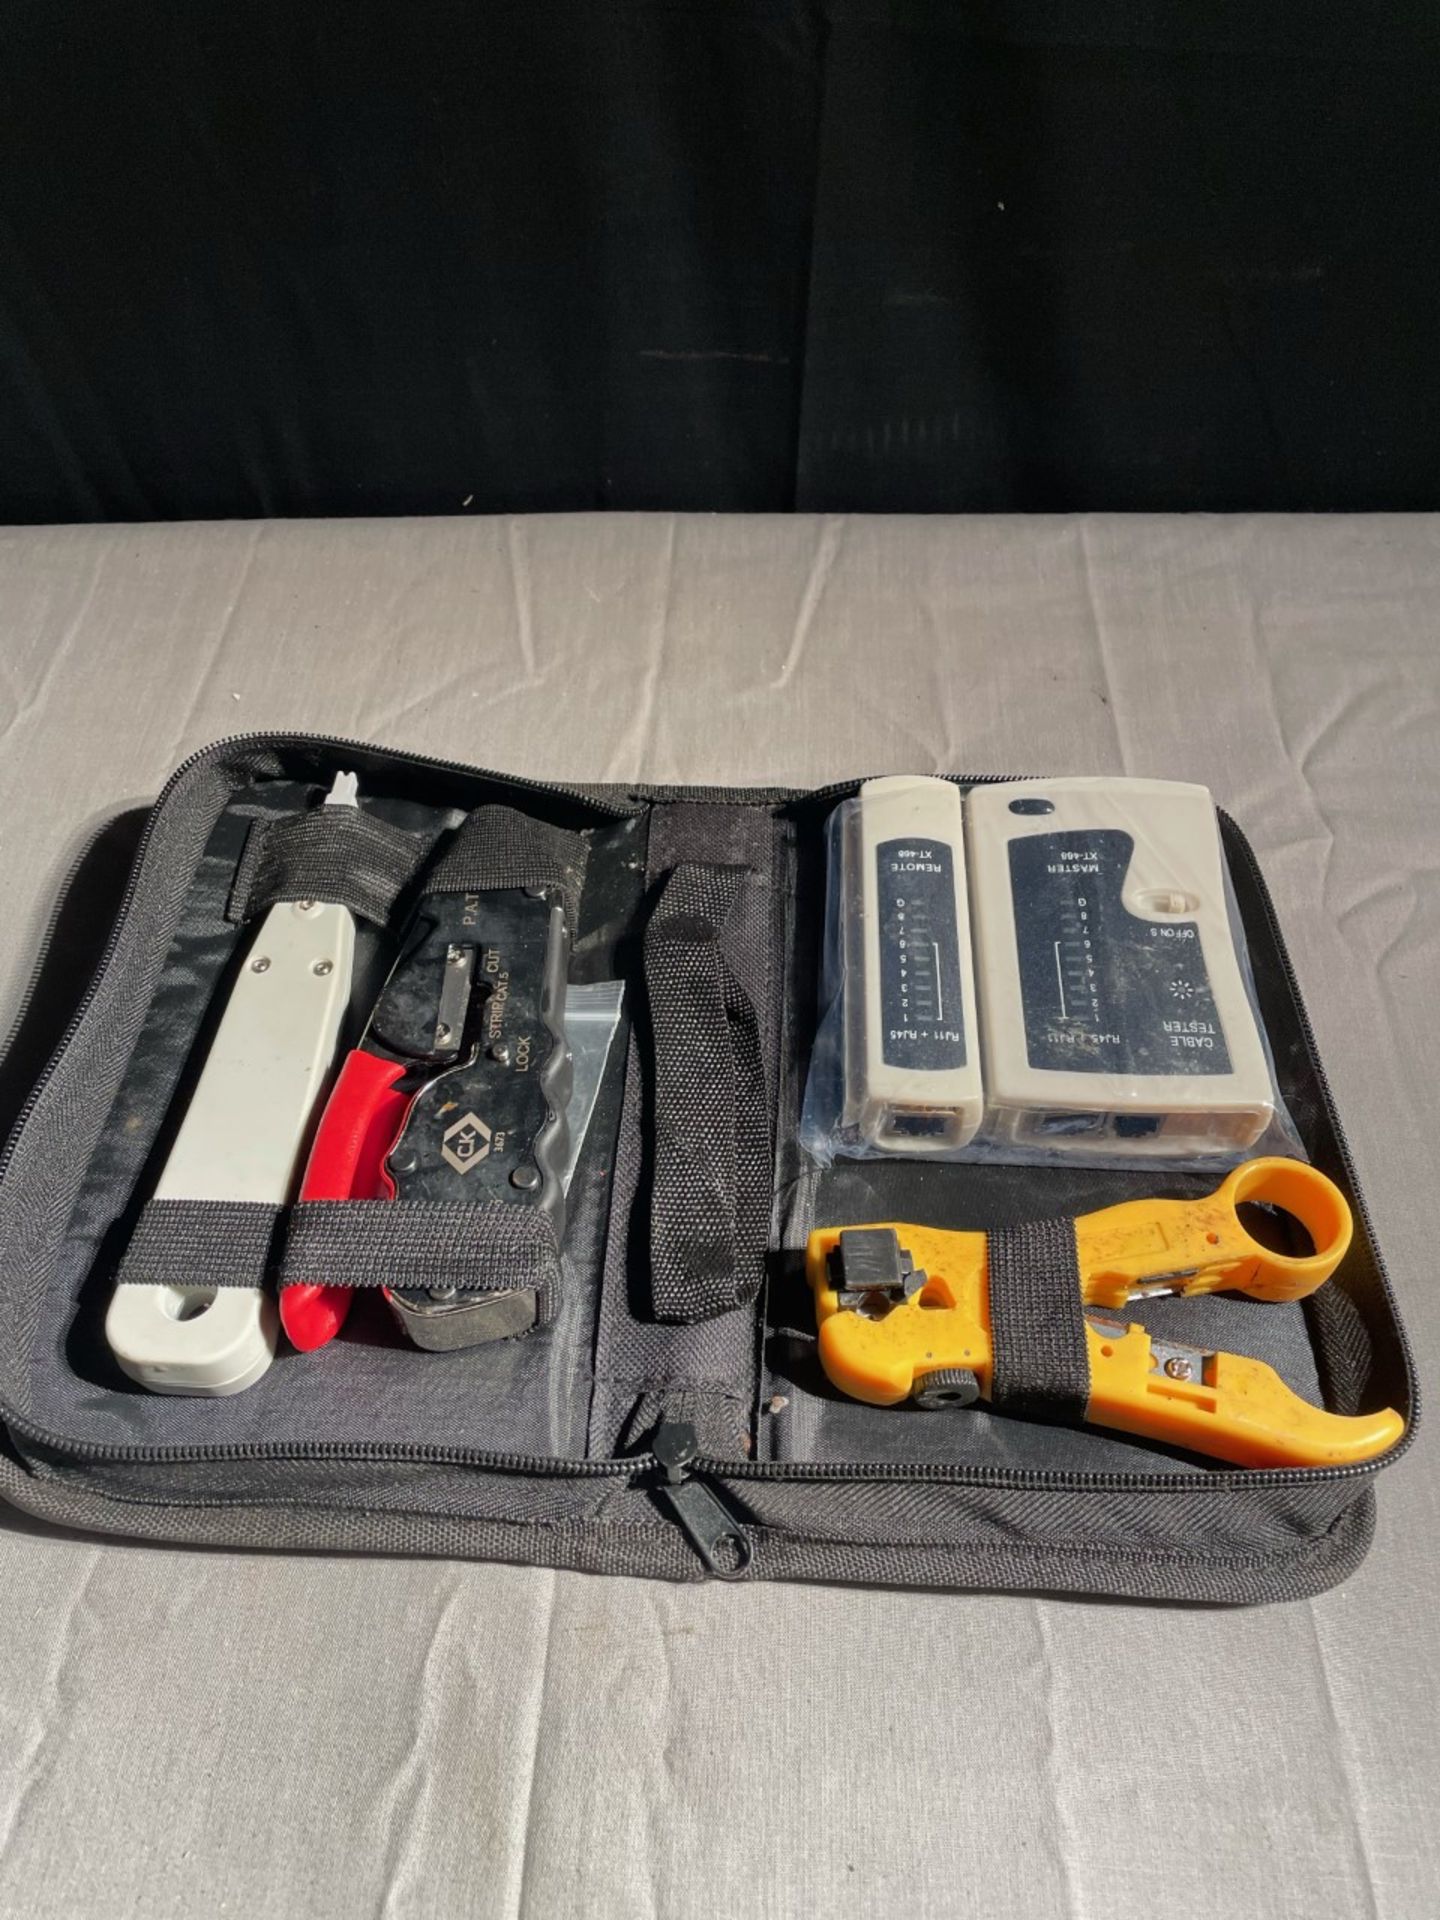 Structured cabling installers kit. Includes tester, crimp tool, punch down tool and cable